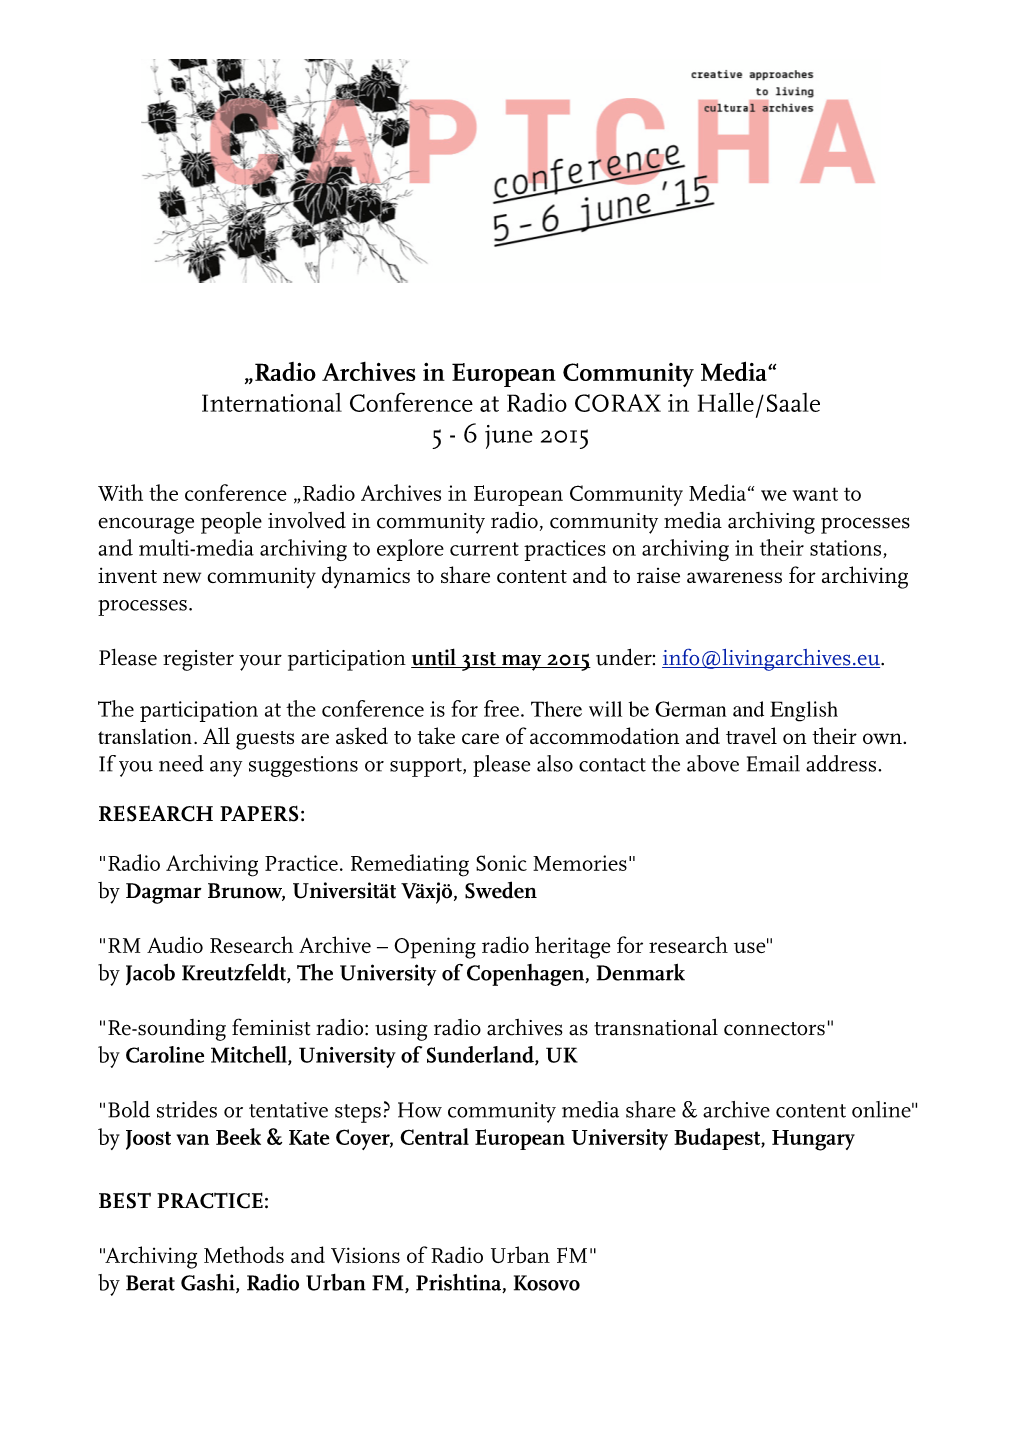 International Conference at Radio CORAX in Halle/Saale 5 - 6 June 2015